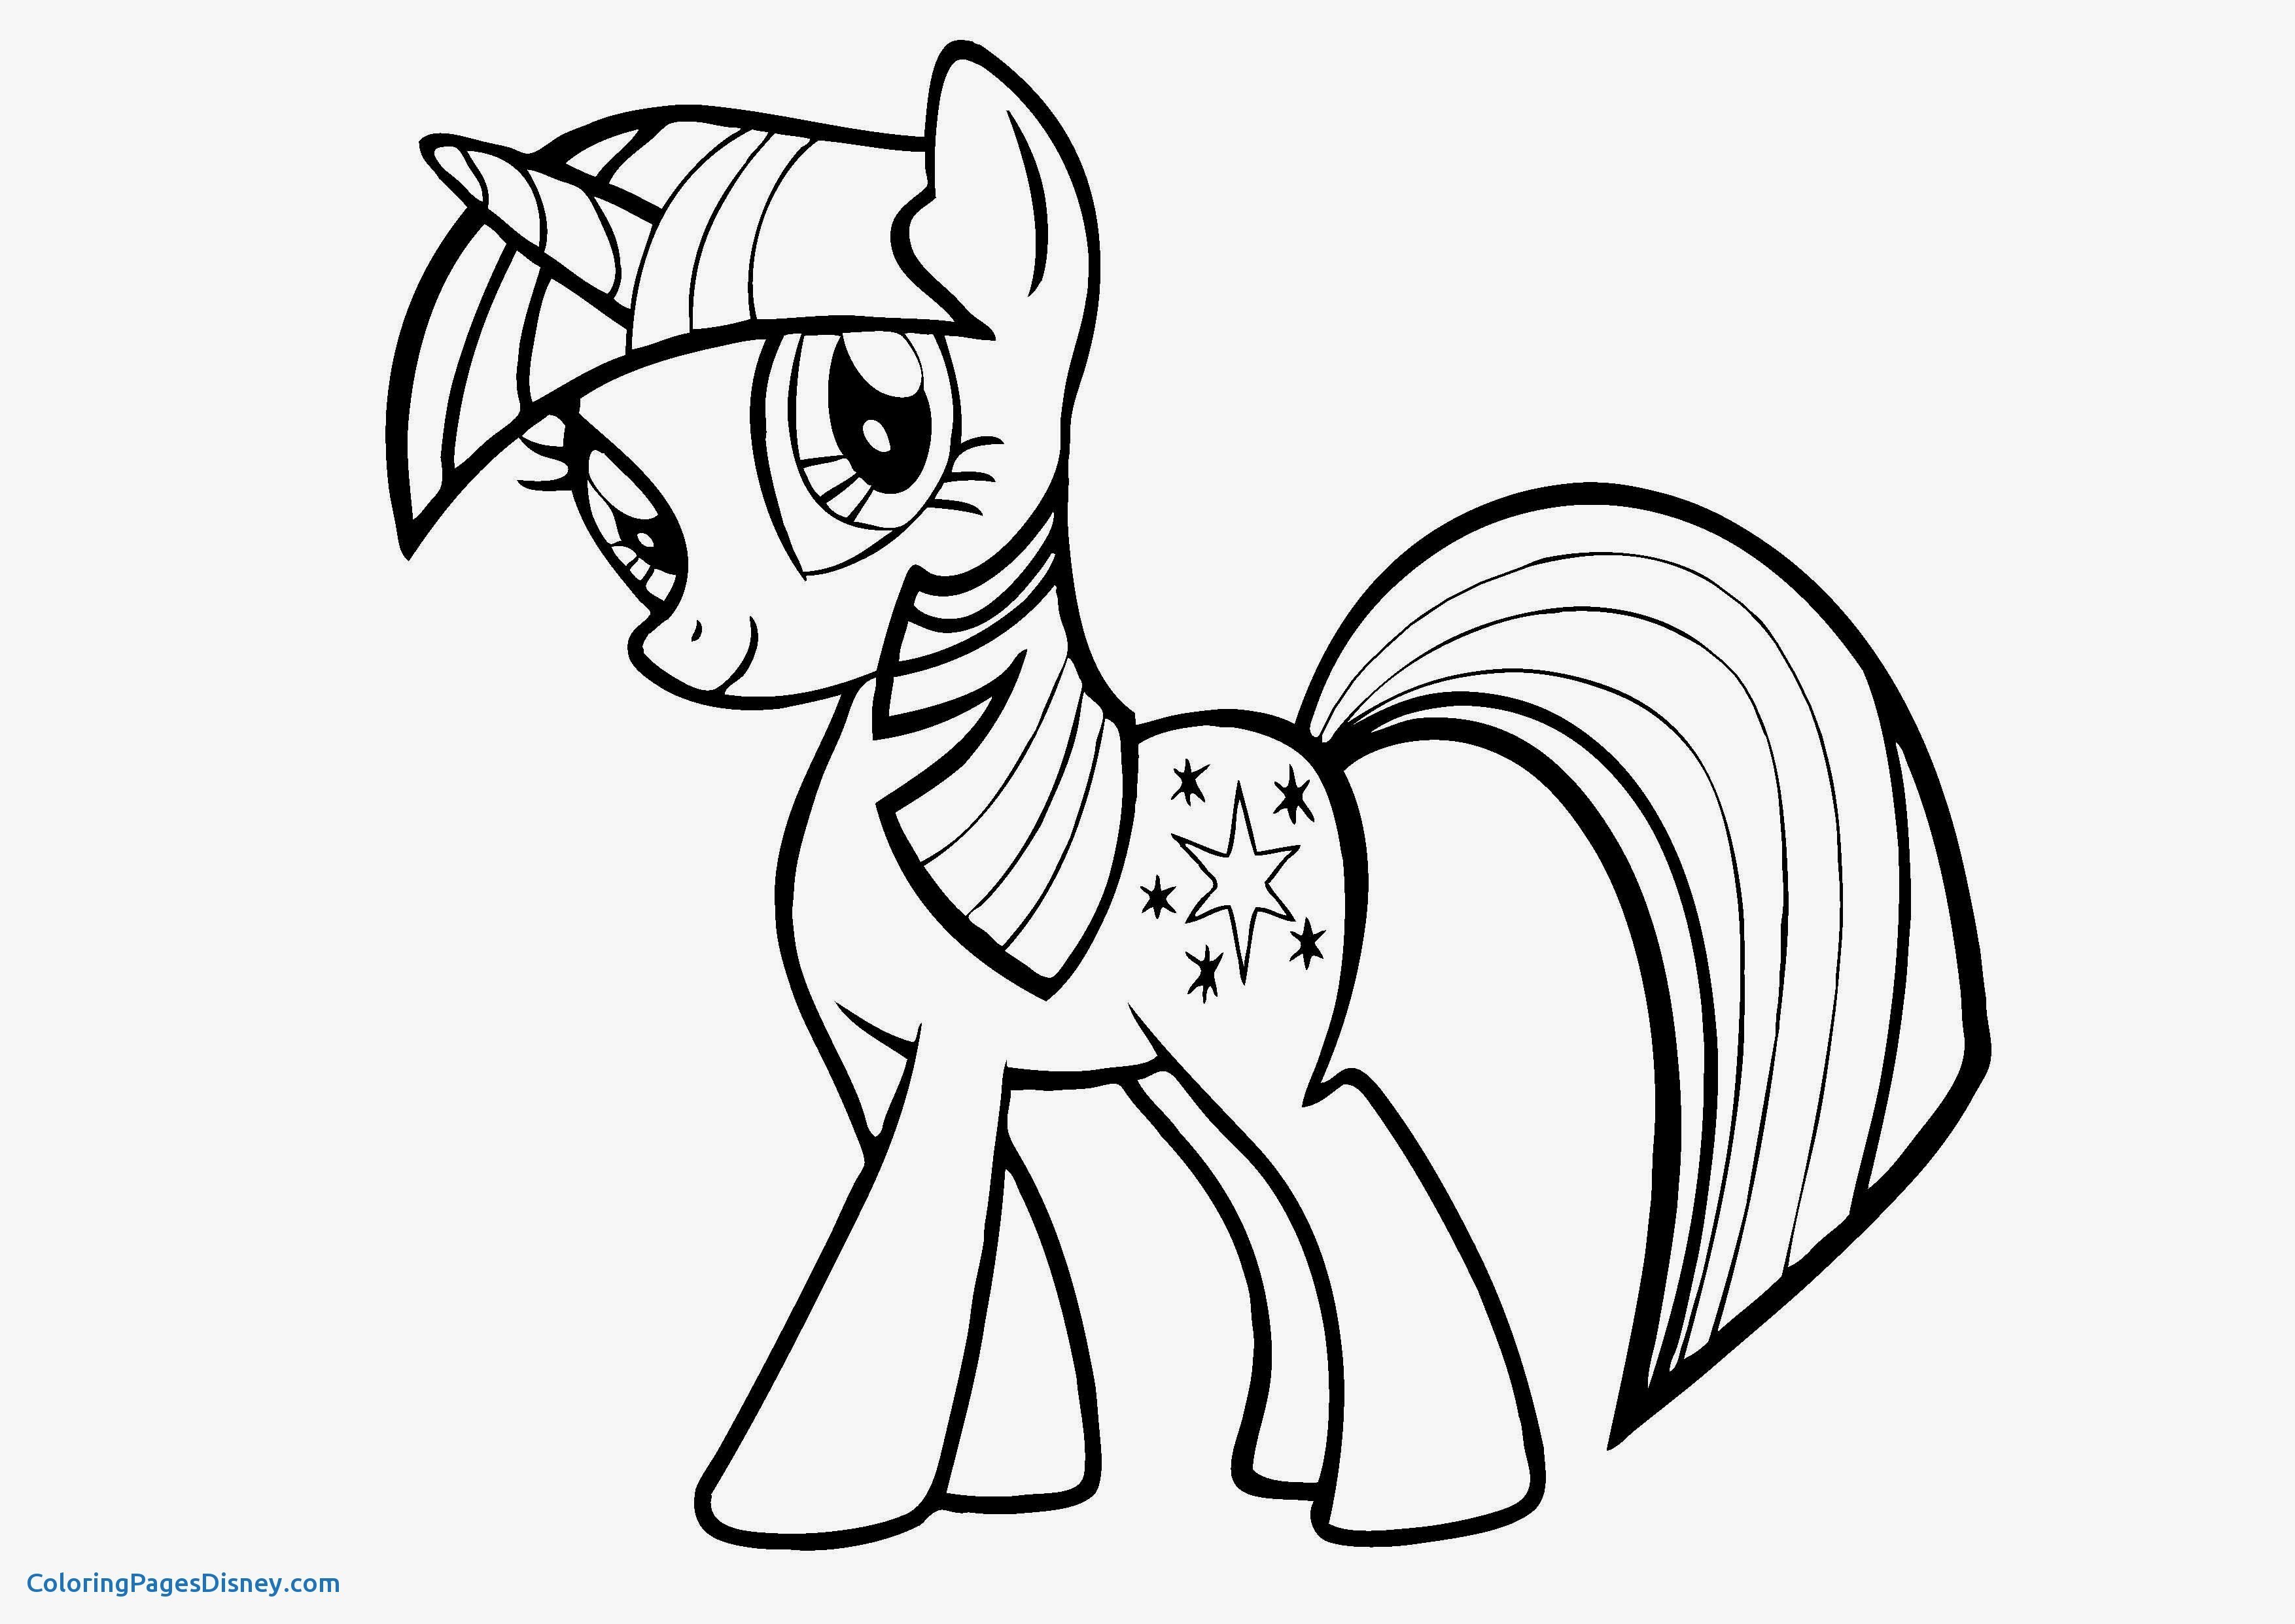 Coloring Games My Little Pony New Coloring Gam for Boys My Little Pony Coloring Pages Line